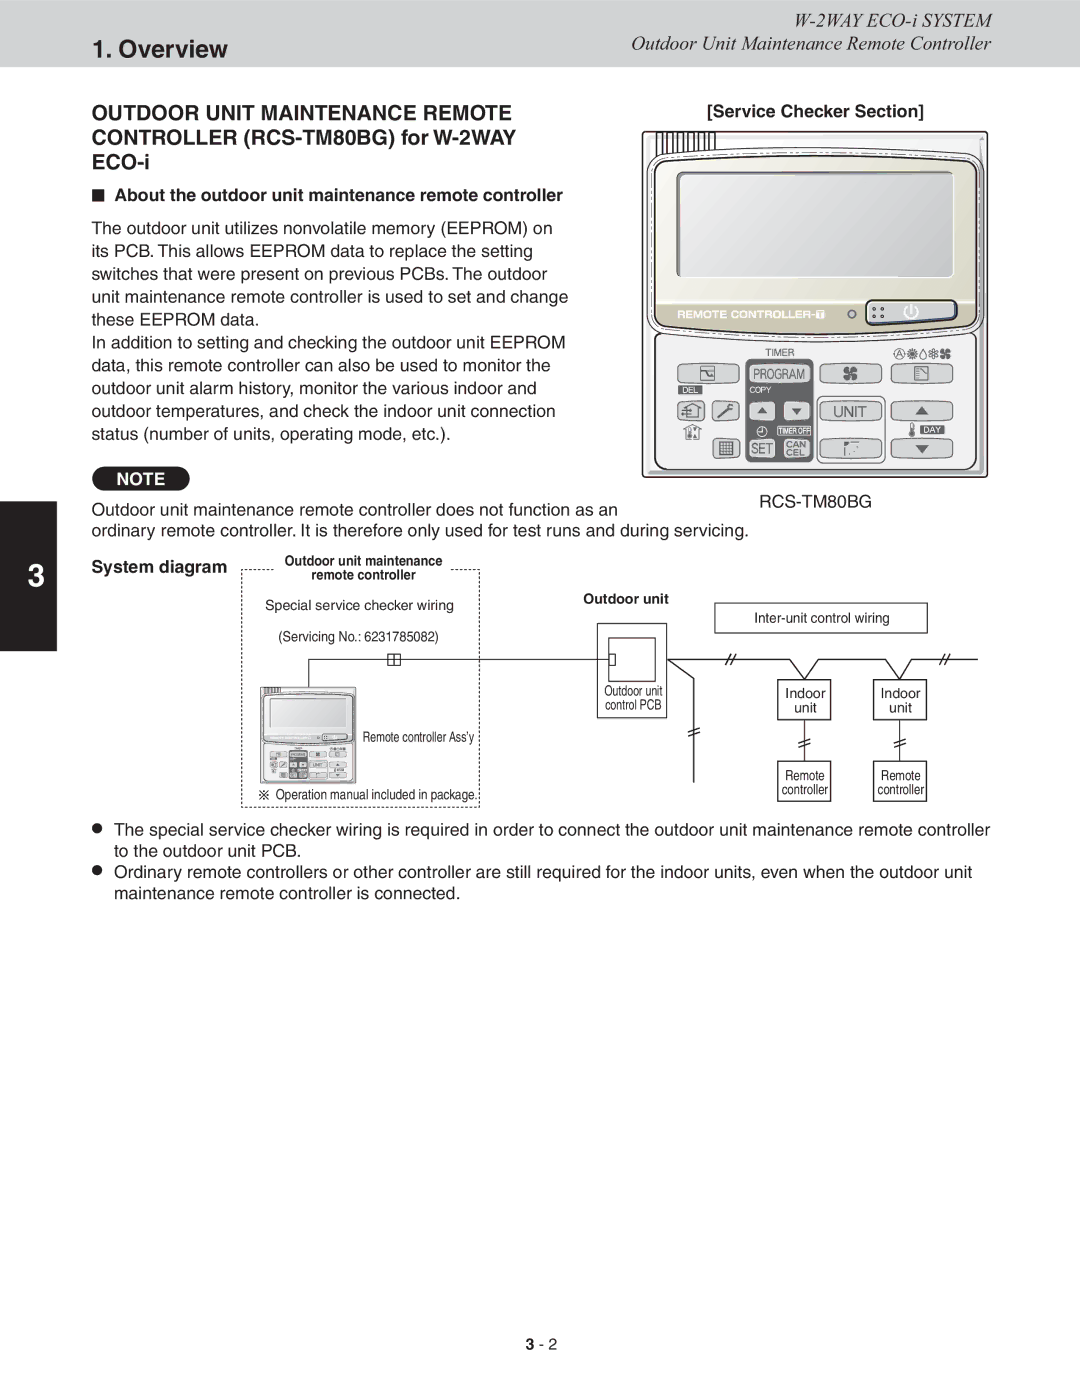 Sanyo CHDXR07263*, CHDXR09663 Overview, NN About the outdoor unit maintenance remote controller, Service Checker Section 